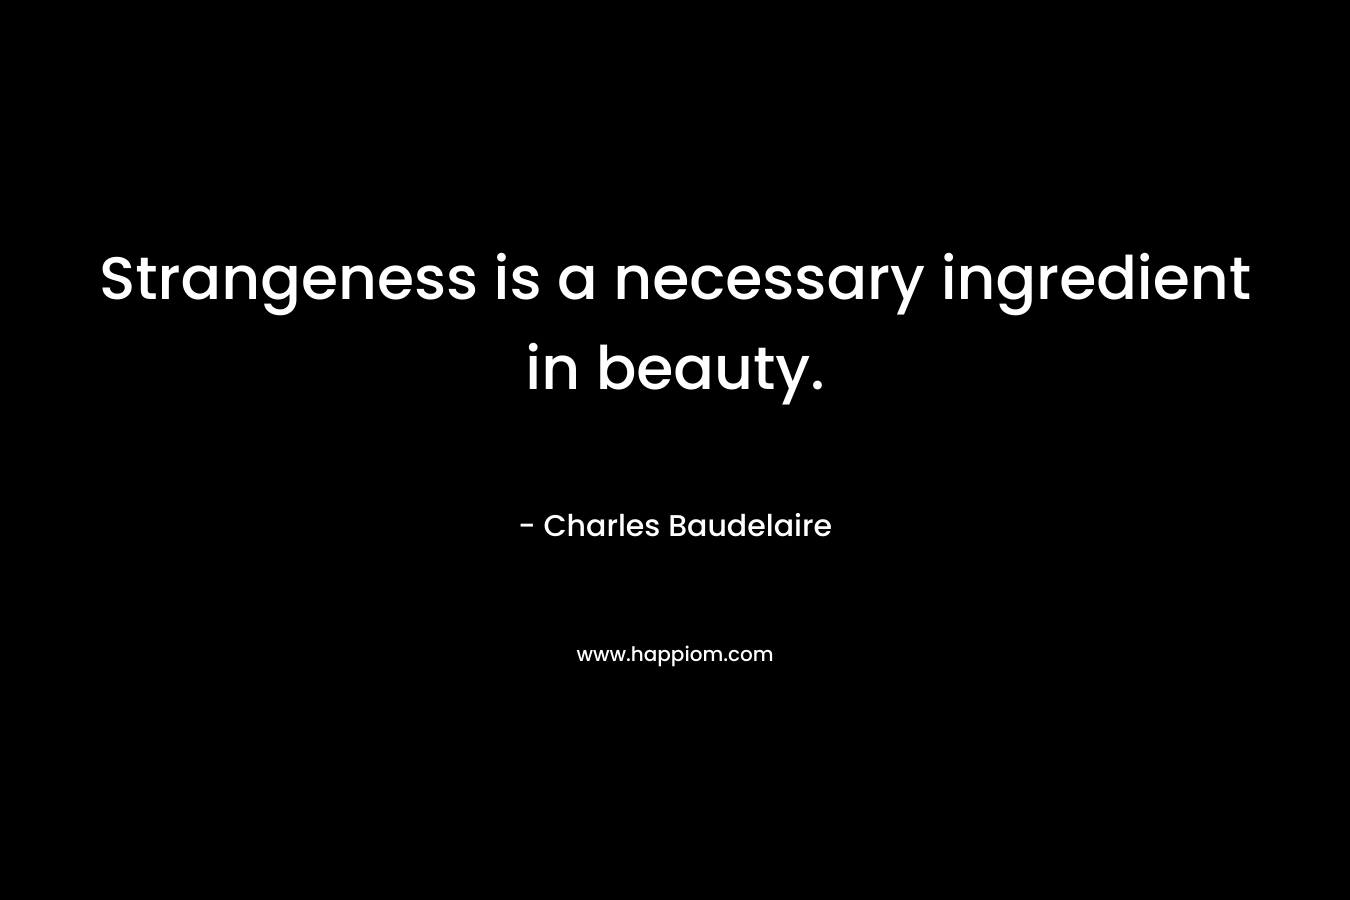 Strangeness is a necessary ingredient in beauty.